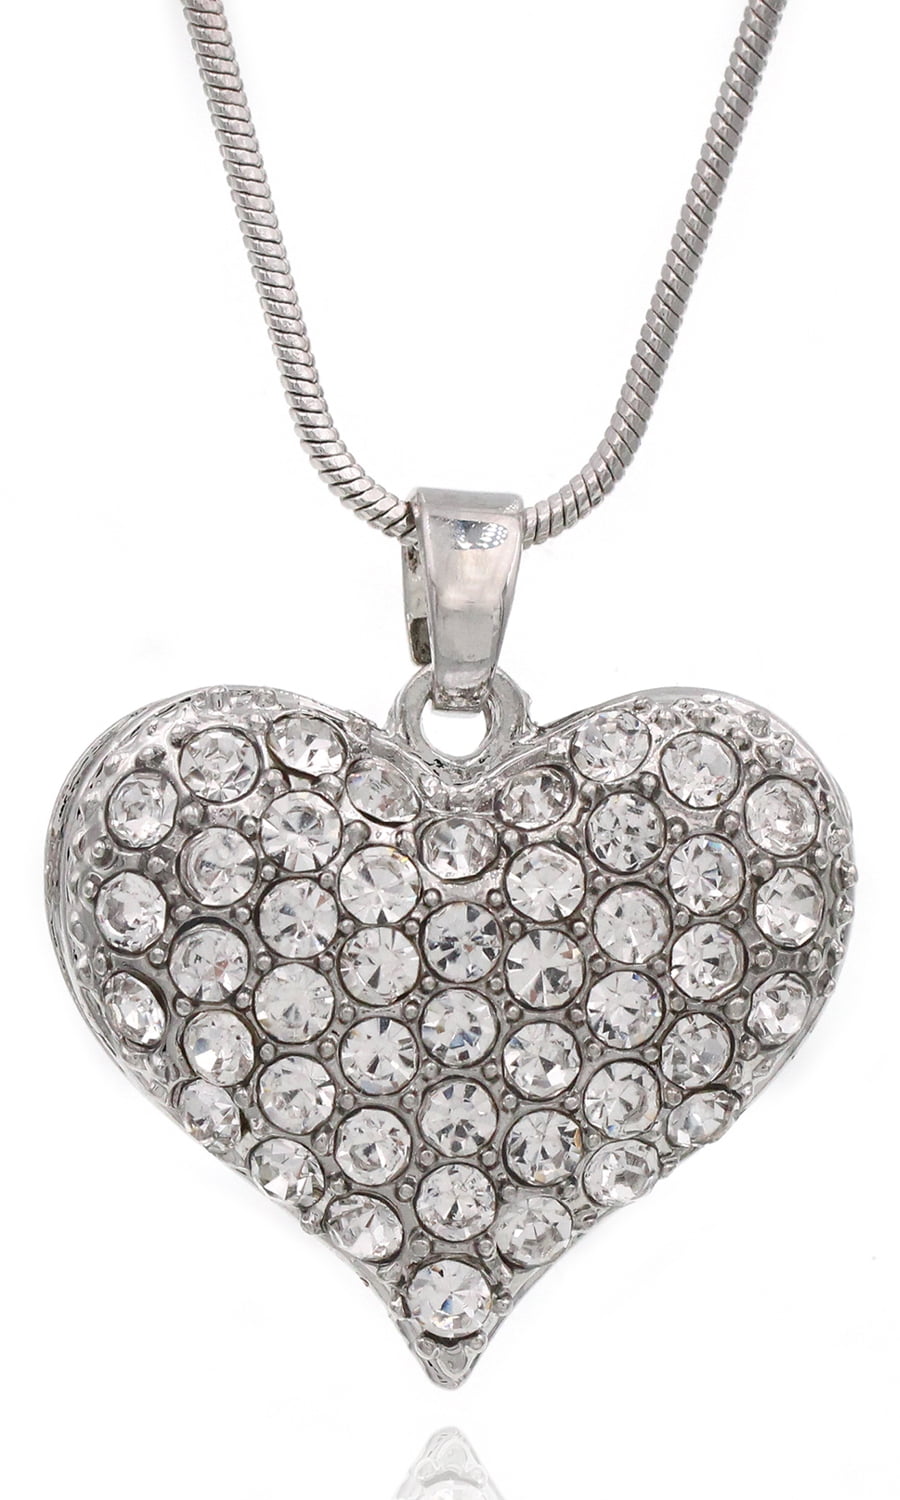 cocojewelry Small Heart Crystal Pave Pendant Necklace Valentine's Day Jewelry GIFT BOX